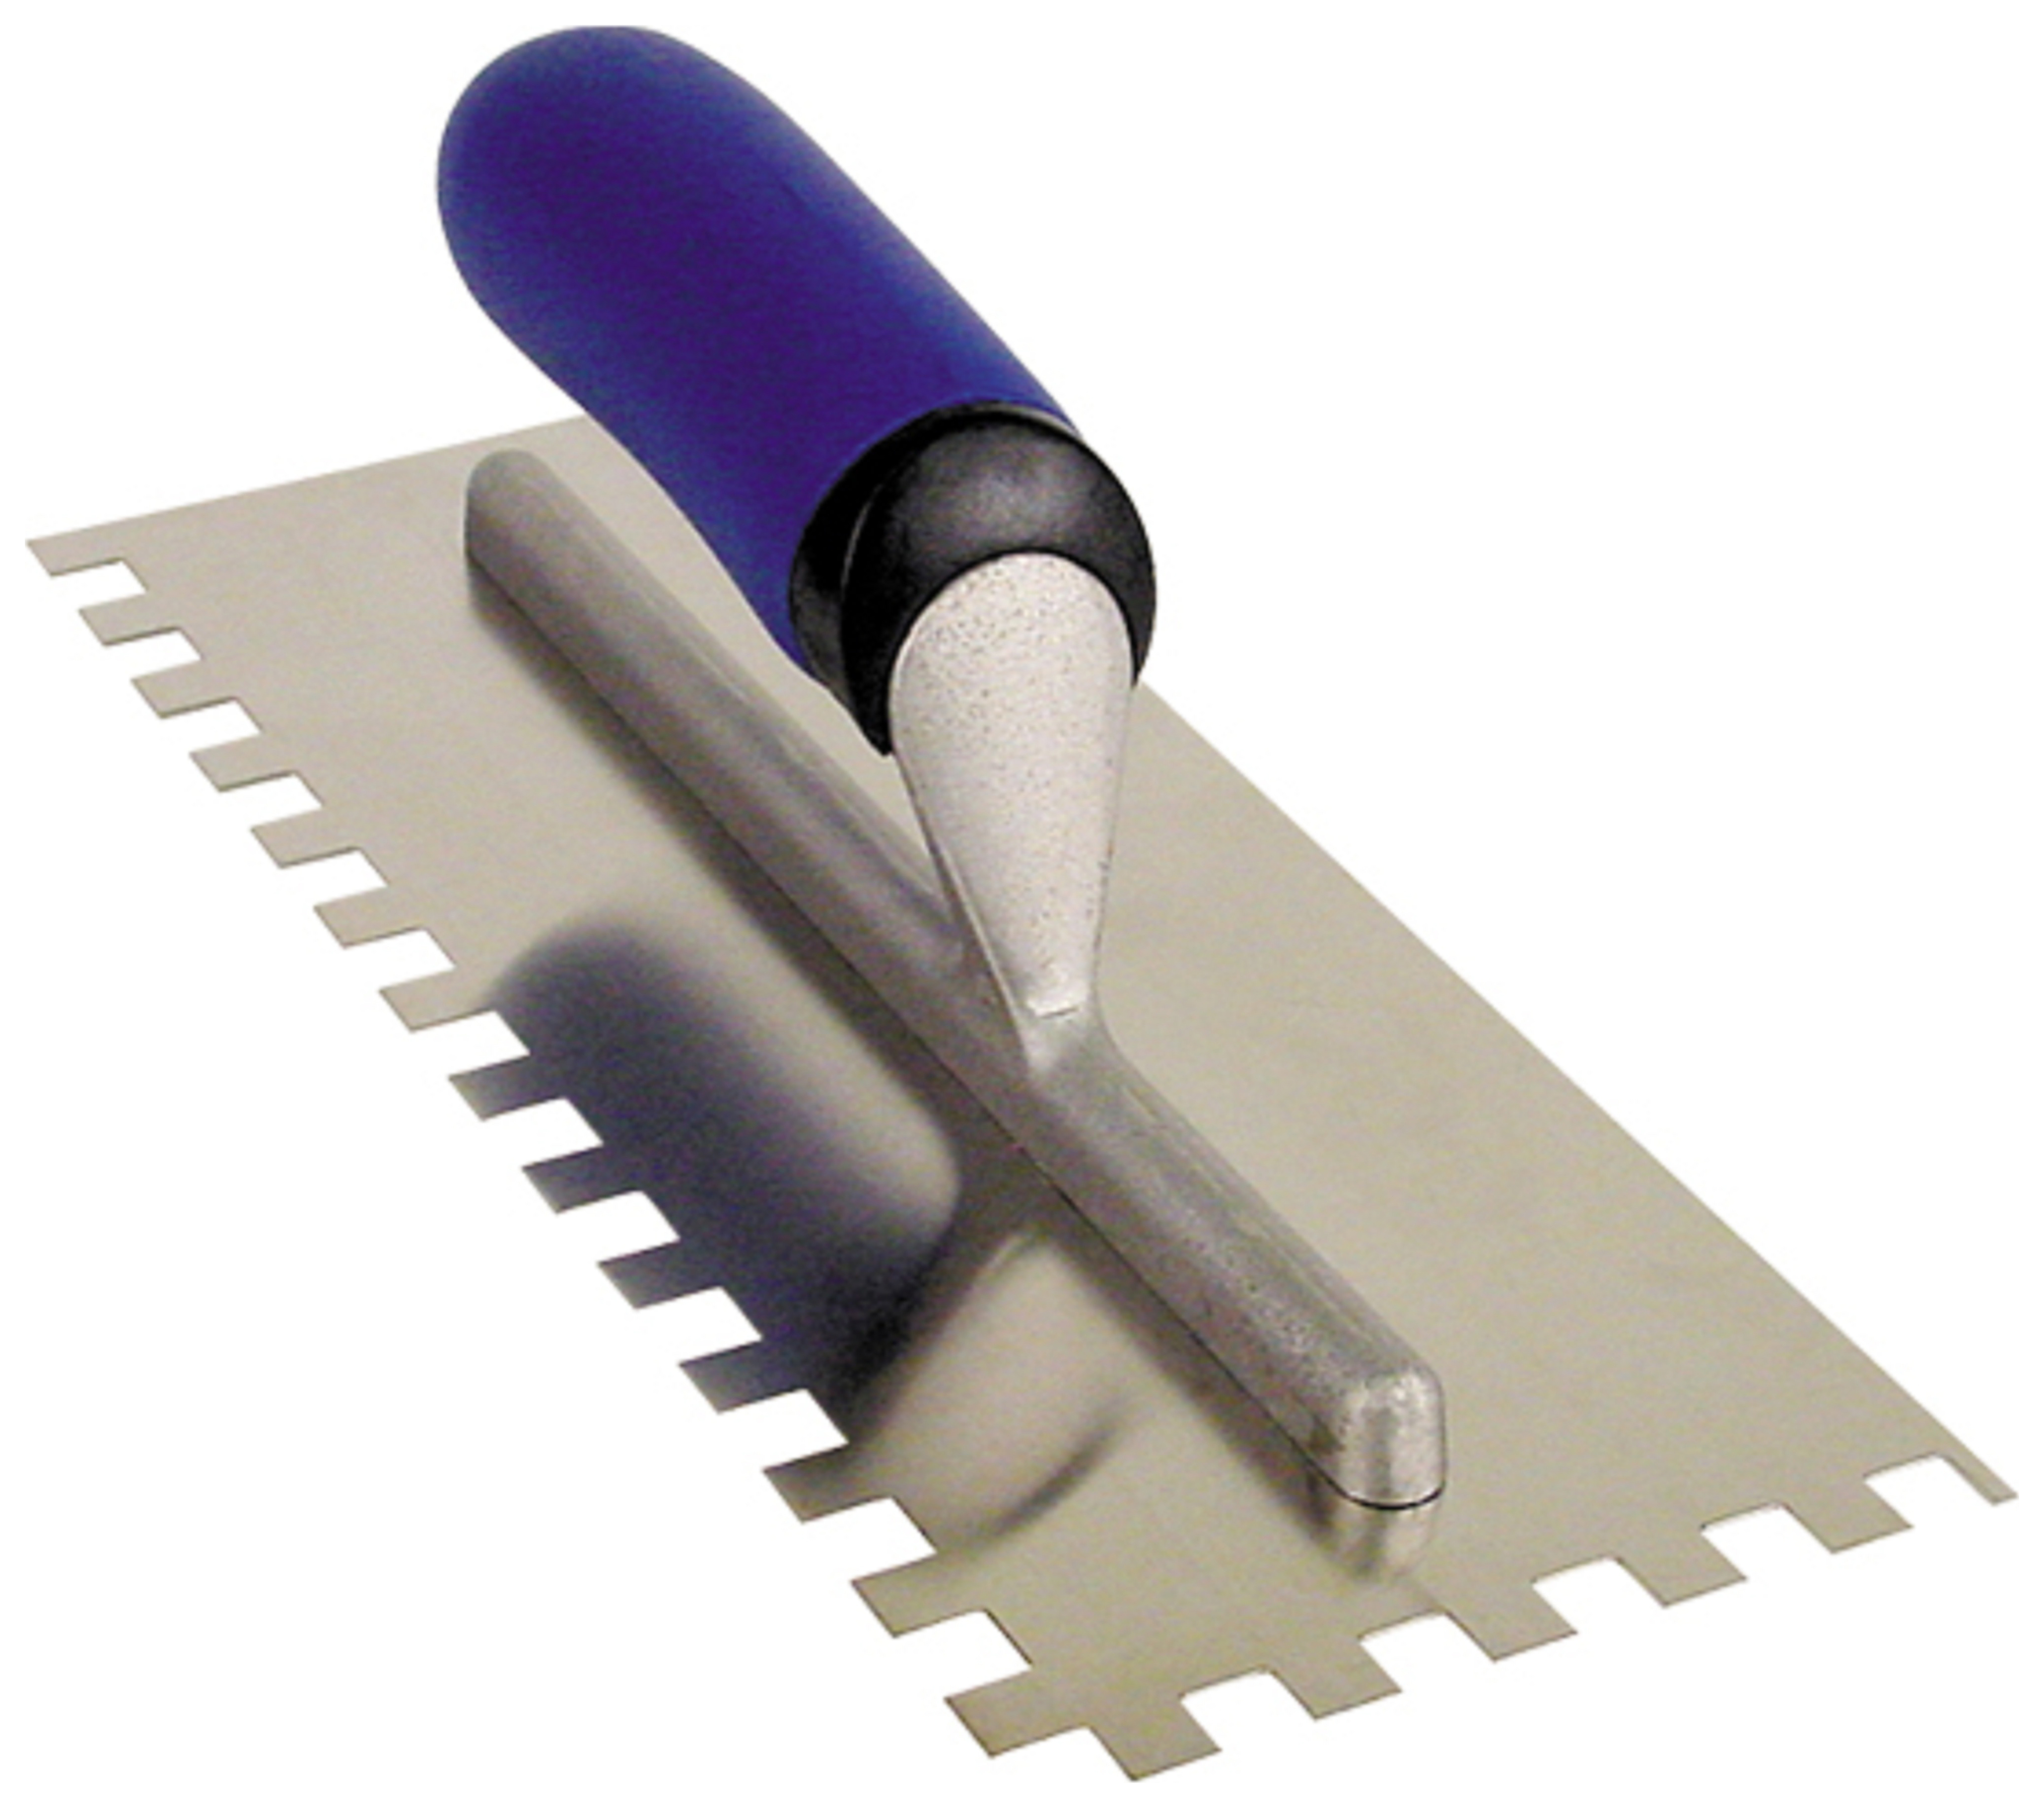 Image of Vitrex 10mm Square Notch Professional Adhesive Trowel